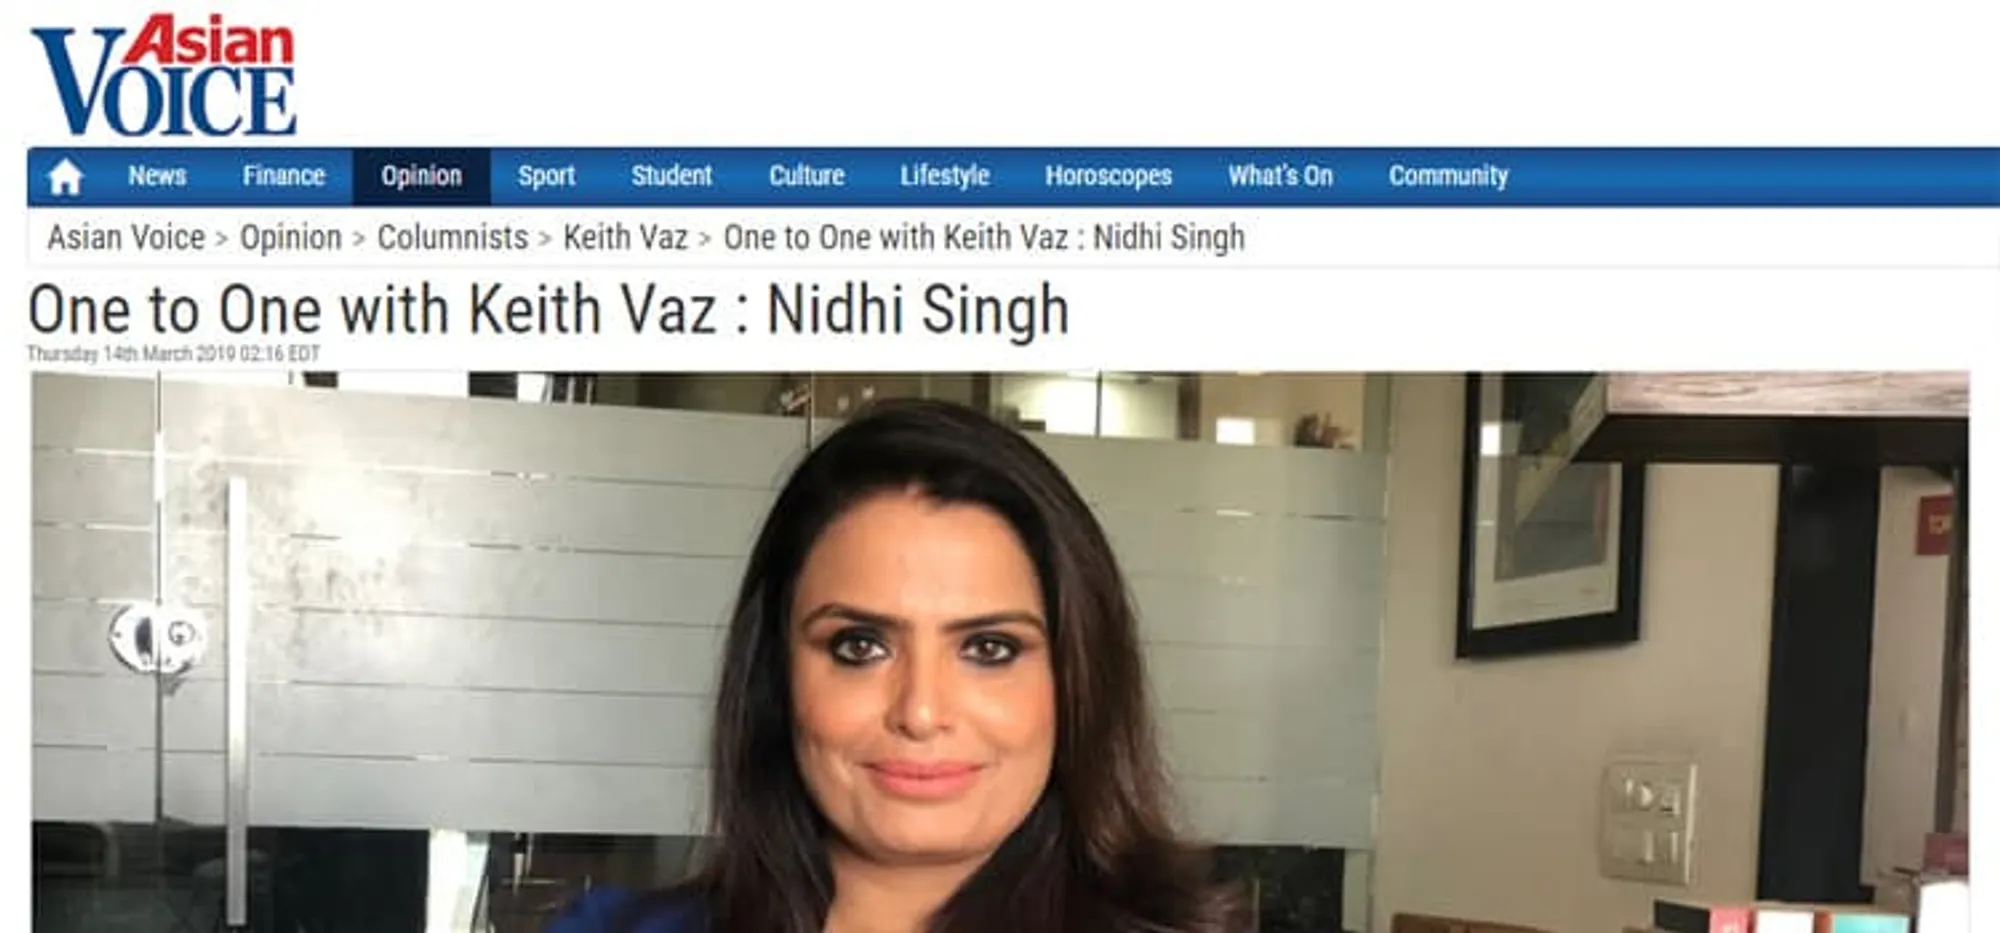 One to One with Keith Vaz- Nidhi Singh